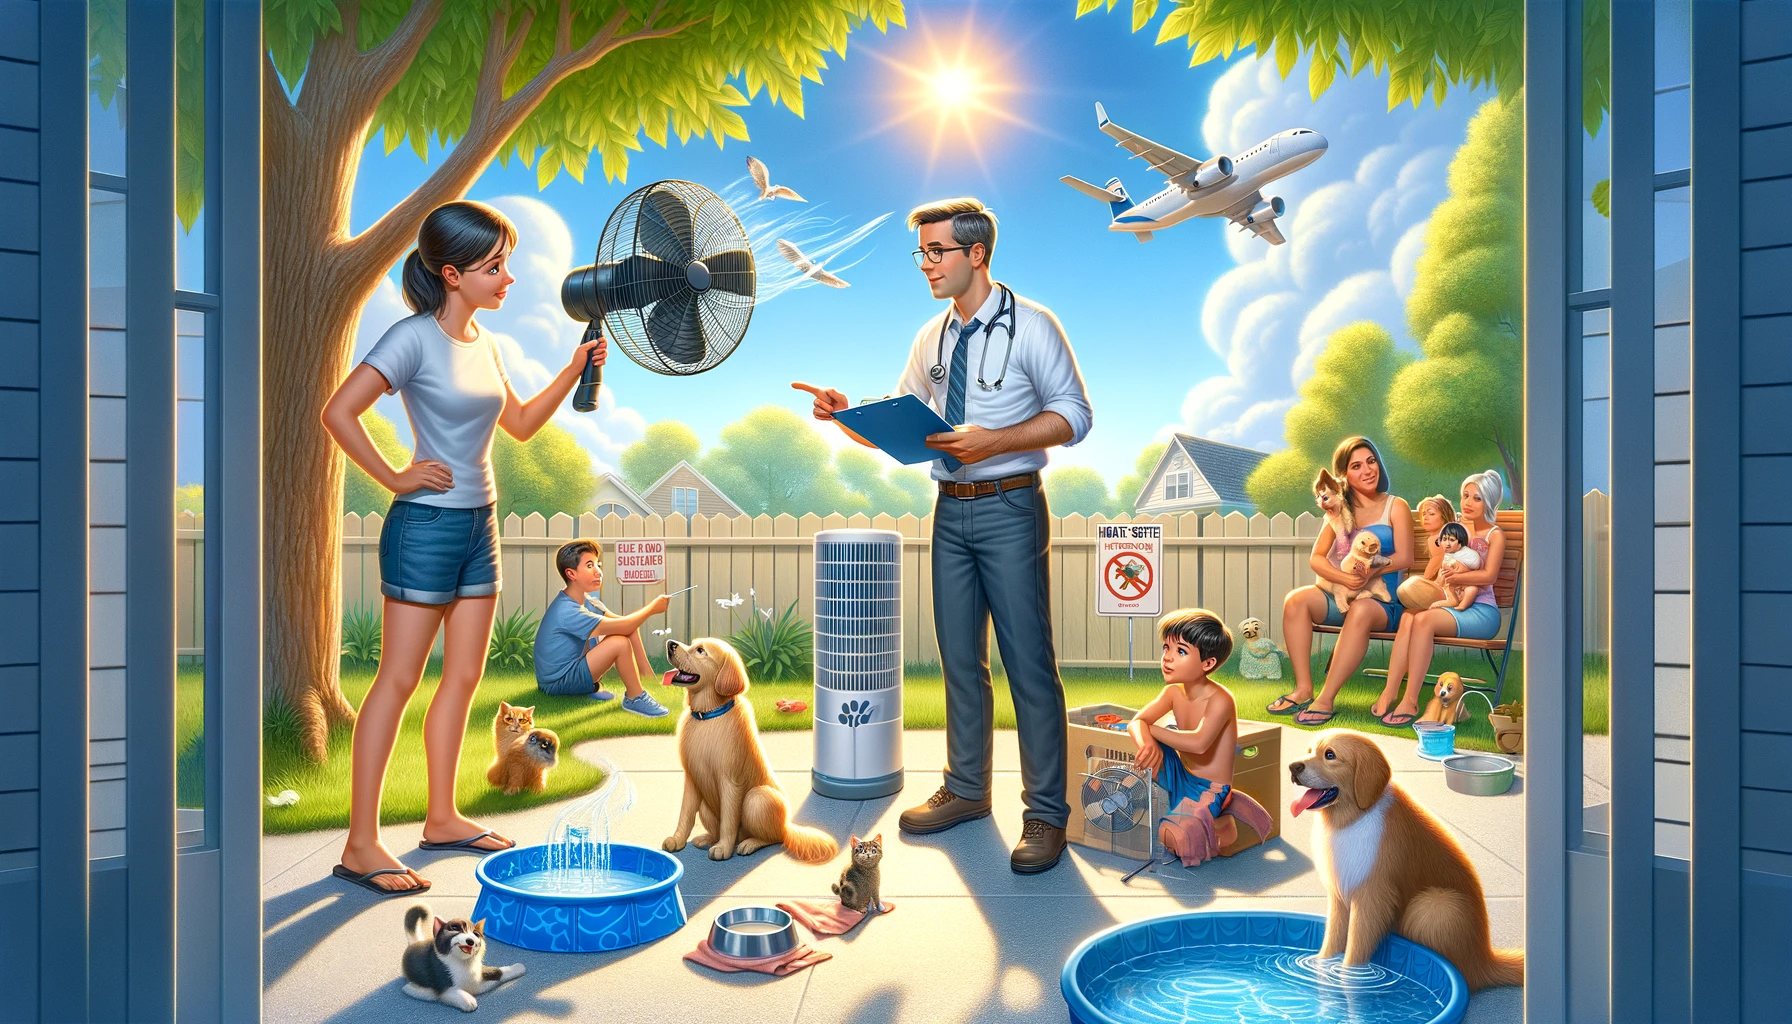 DALL·E 2024 03 09 11.47.35 Visualize a caring scenario during a heat wave aimed at pet safety focusing on a veterinarian advising a family in a backyard setting. The vet shown